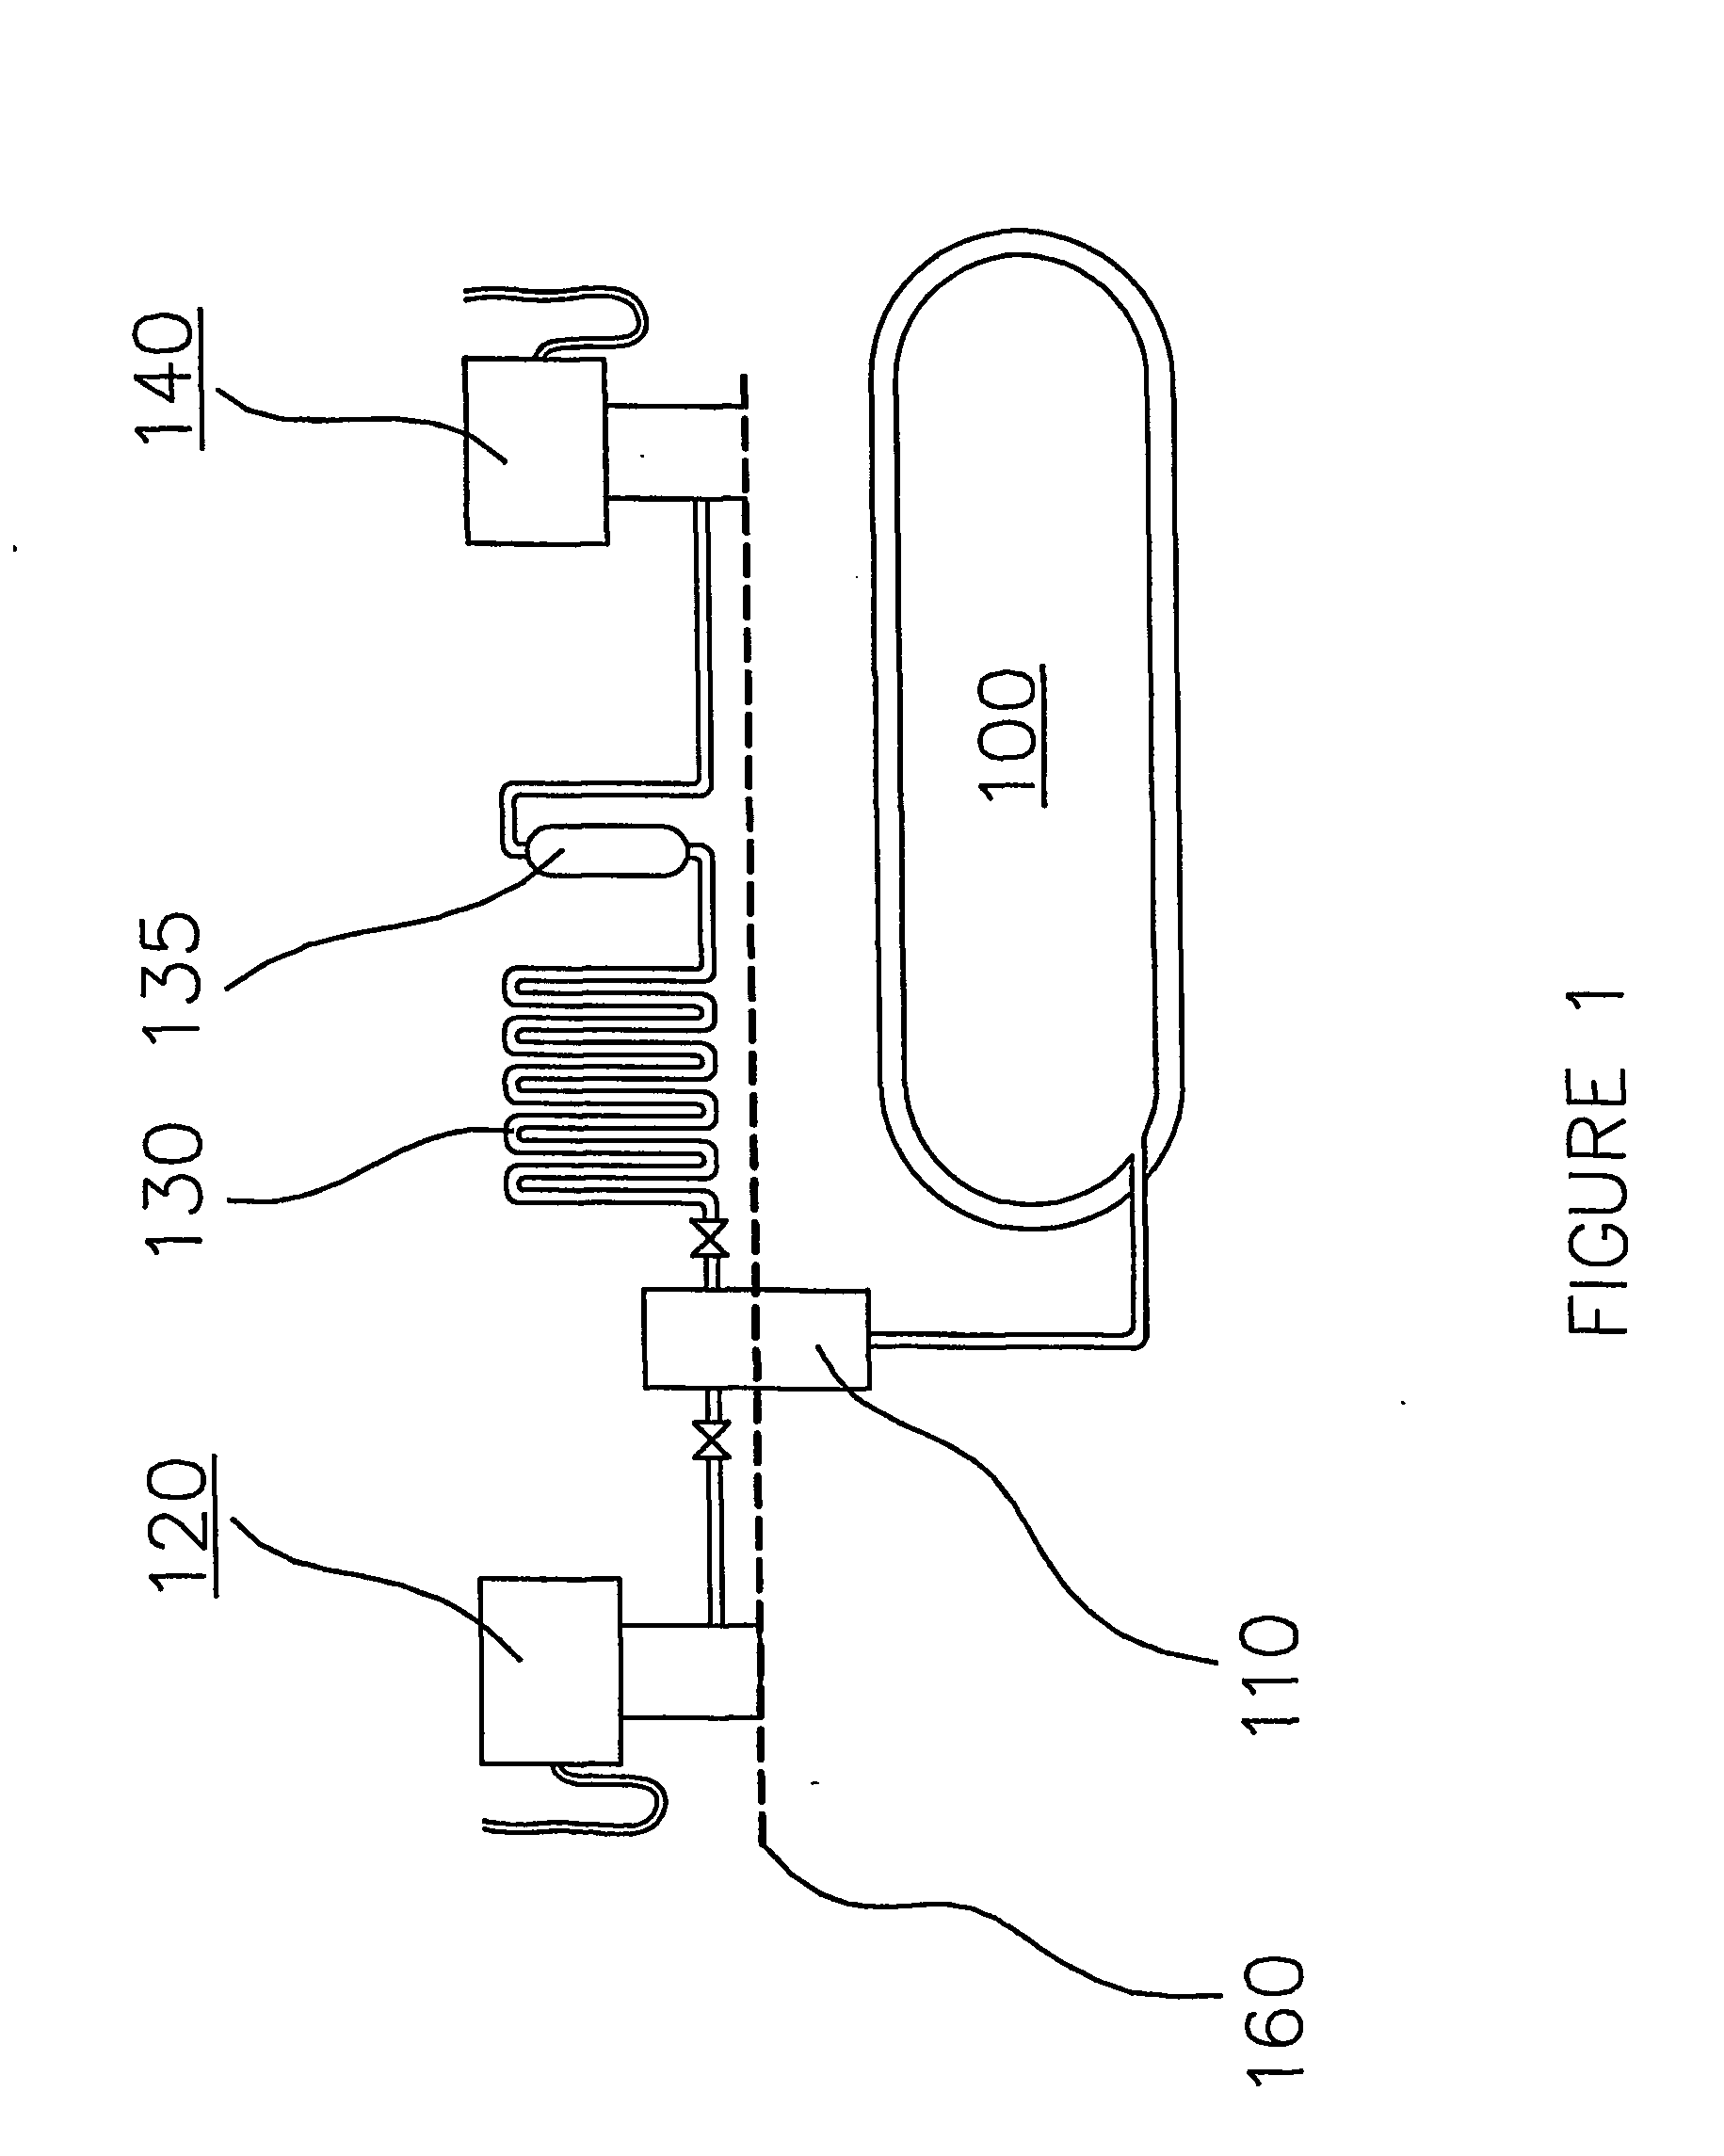 Combined liquefied gas and compressed gas re-fueling station and method of operating same